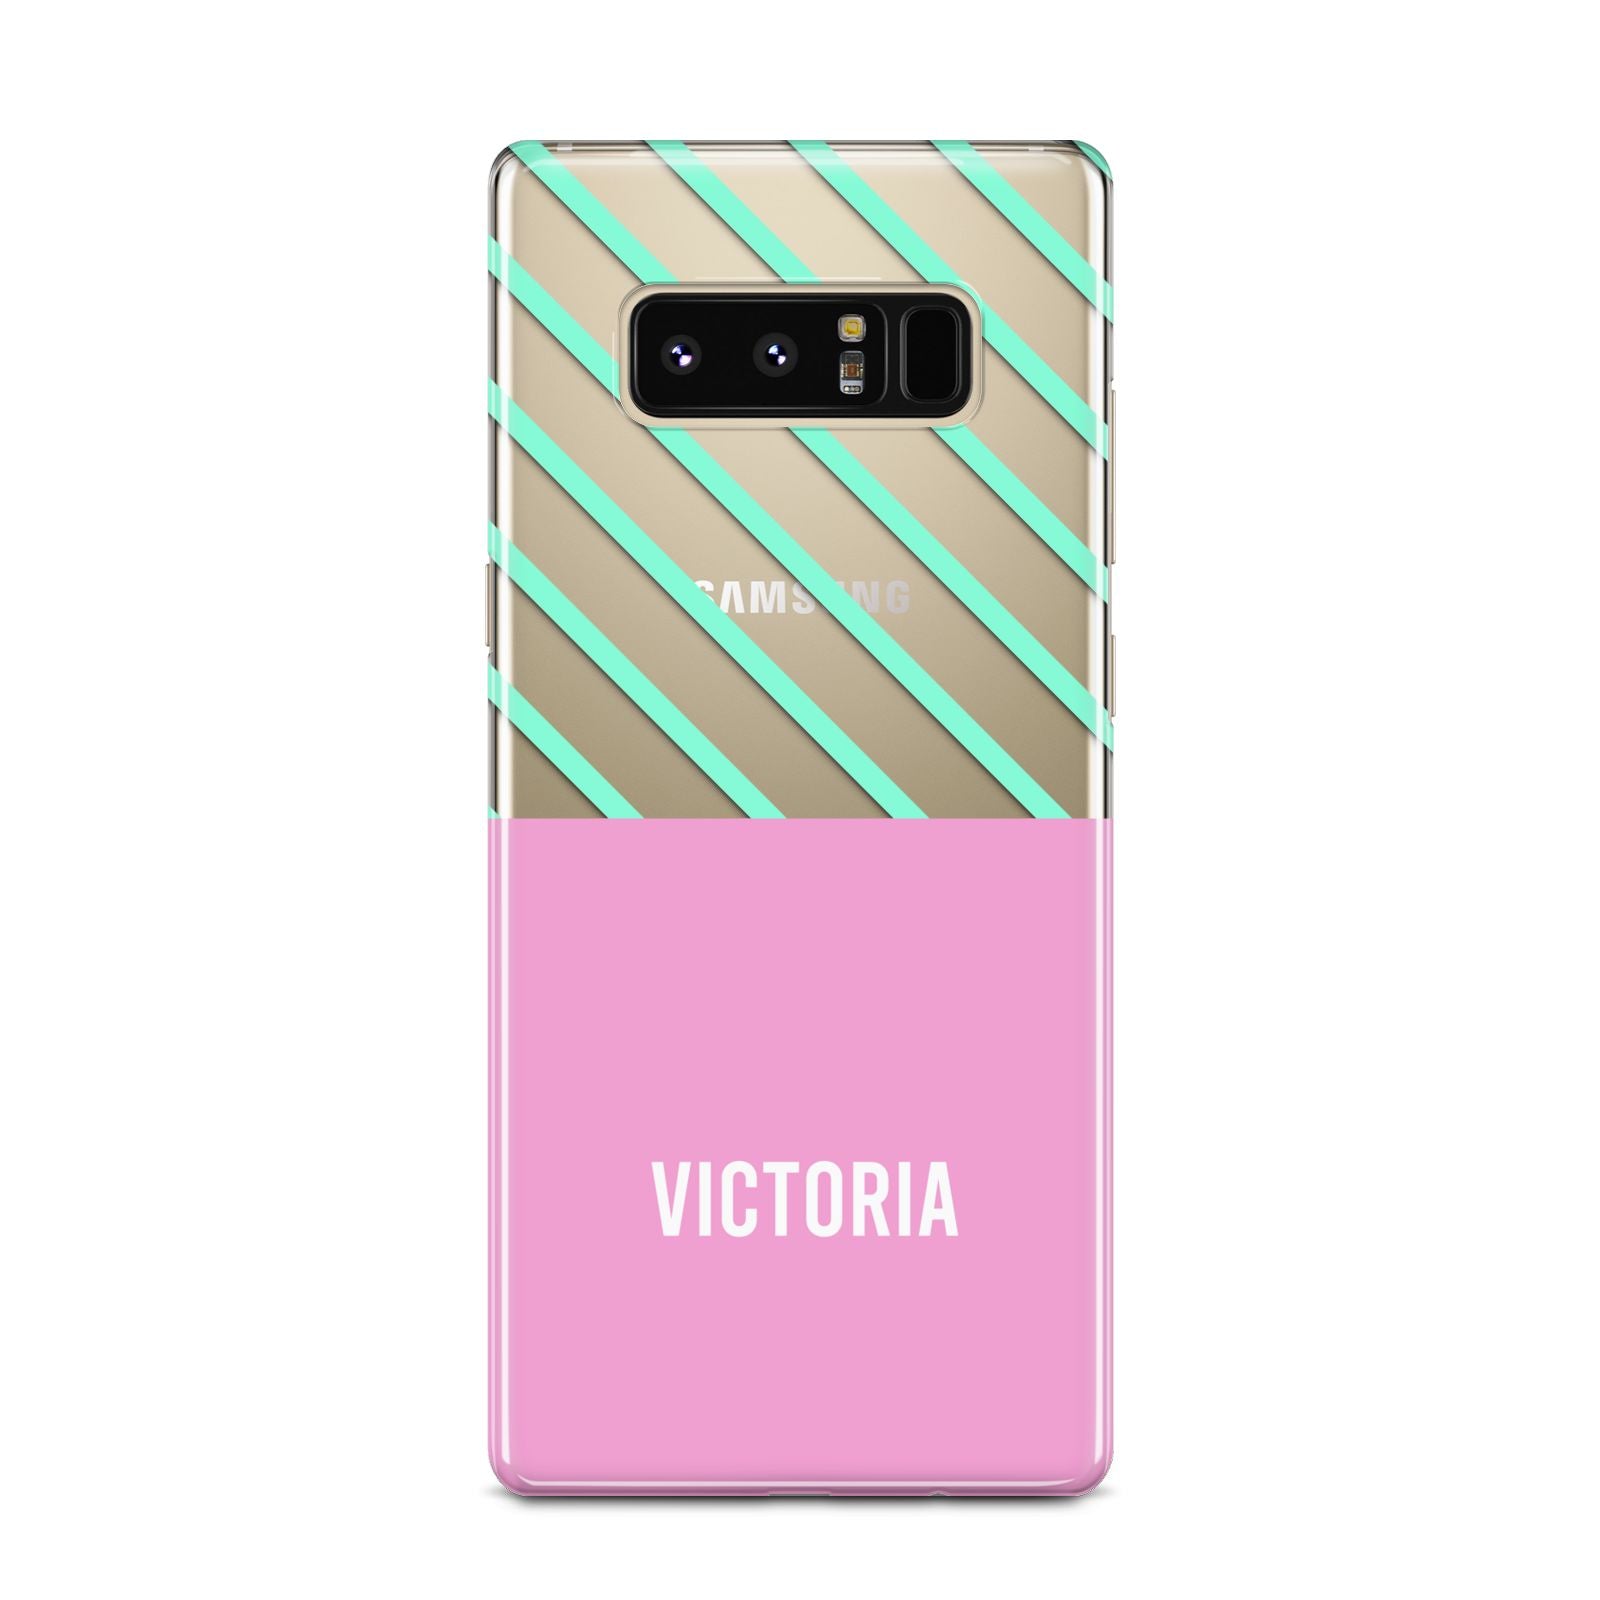 Personalised Pink Aqua Striped Samsung Galaxy Note 8 Case